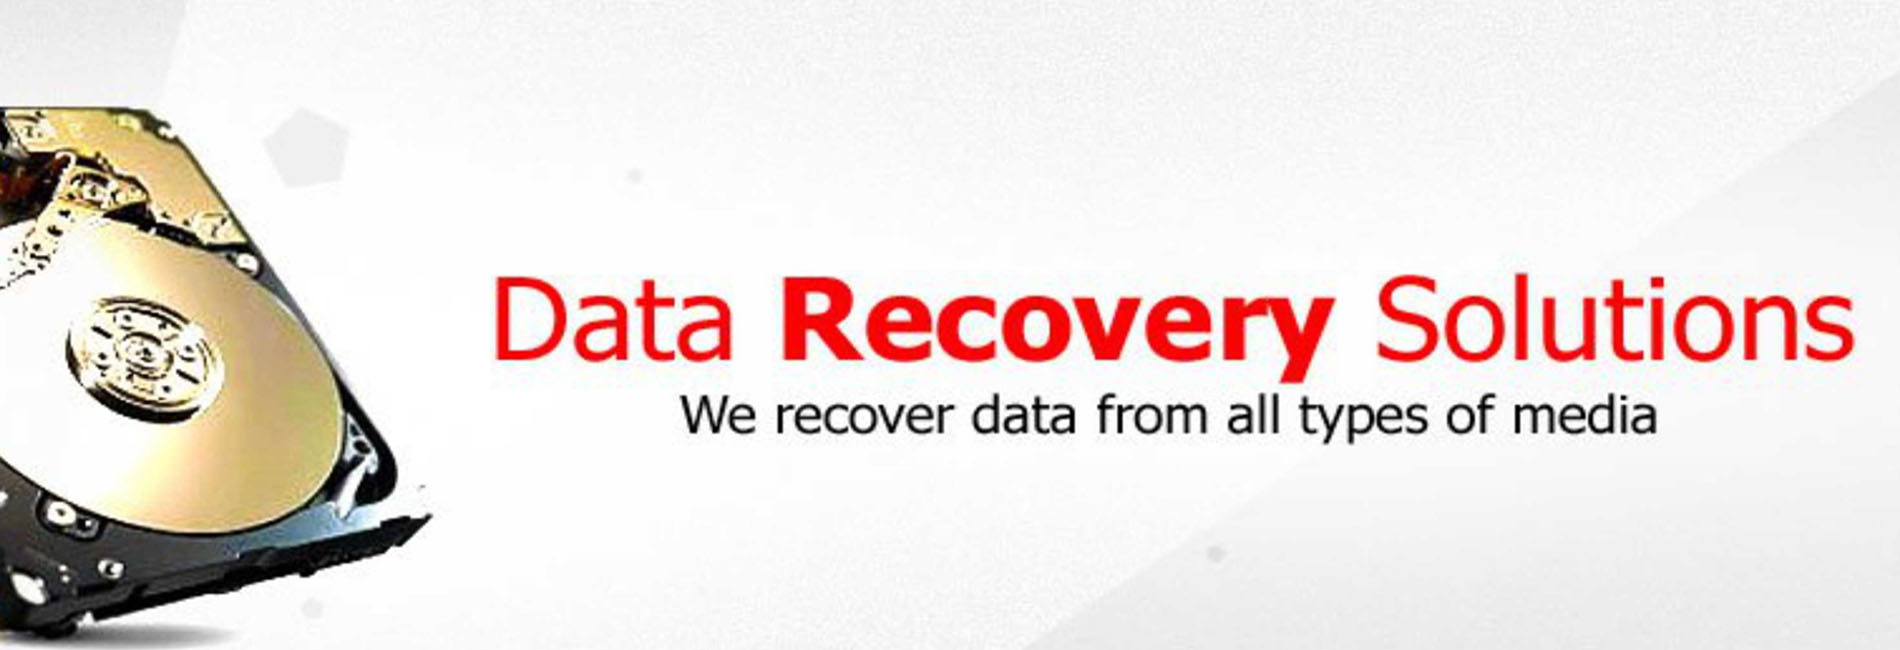 Data Recovery & Backup Services in Delhi NCR